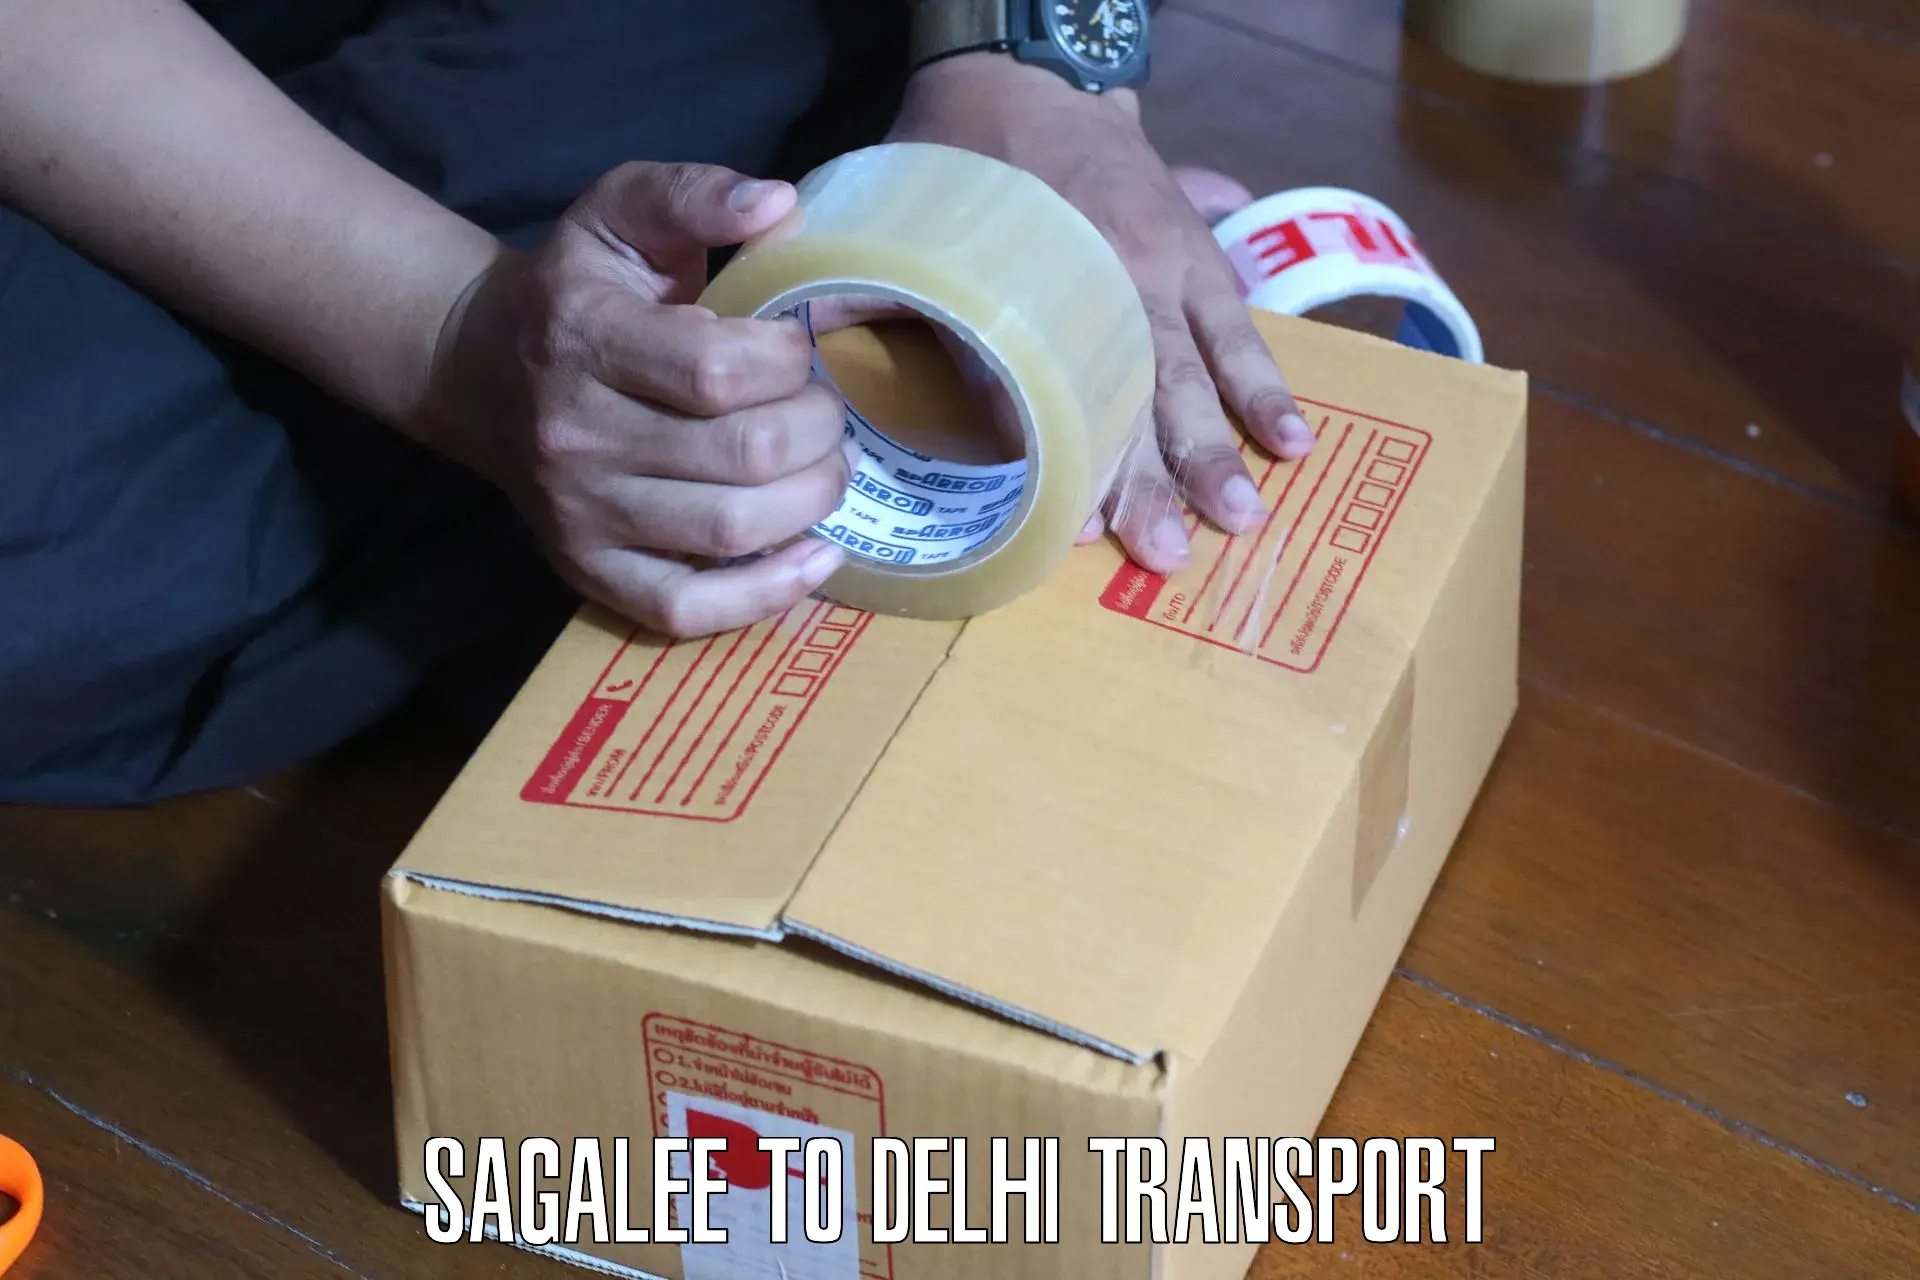 Air freight transport services Sagalee to NCR